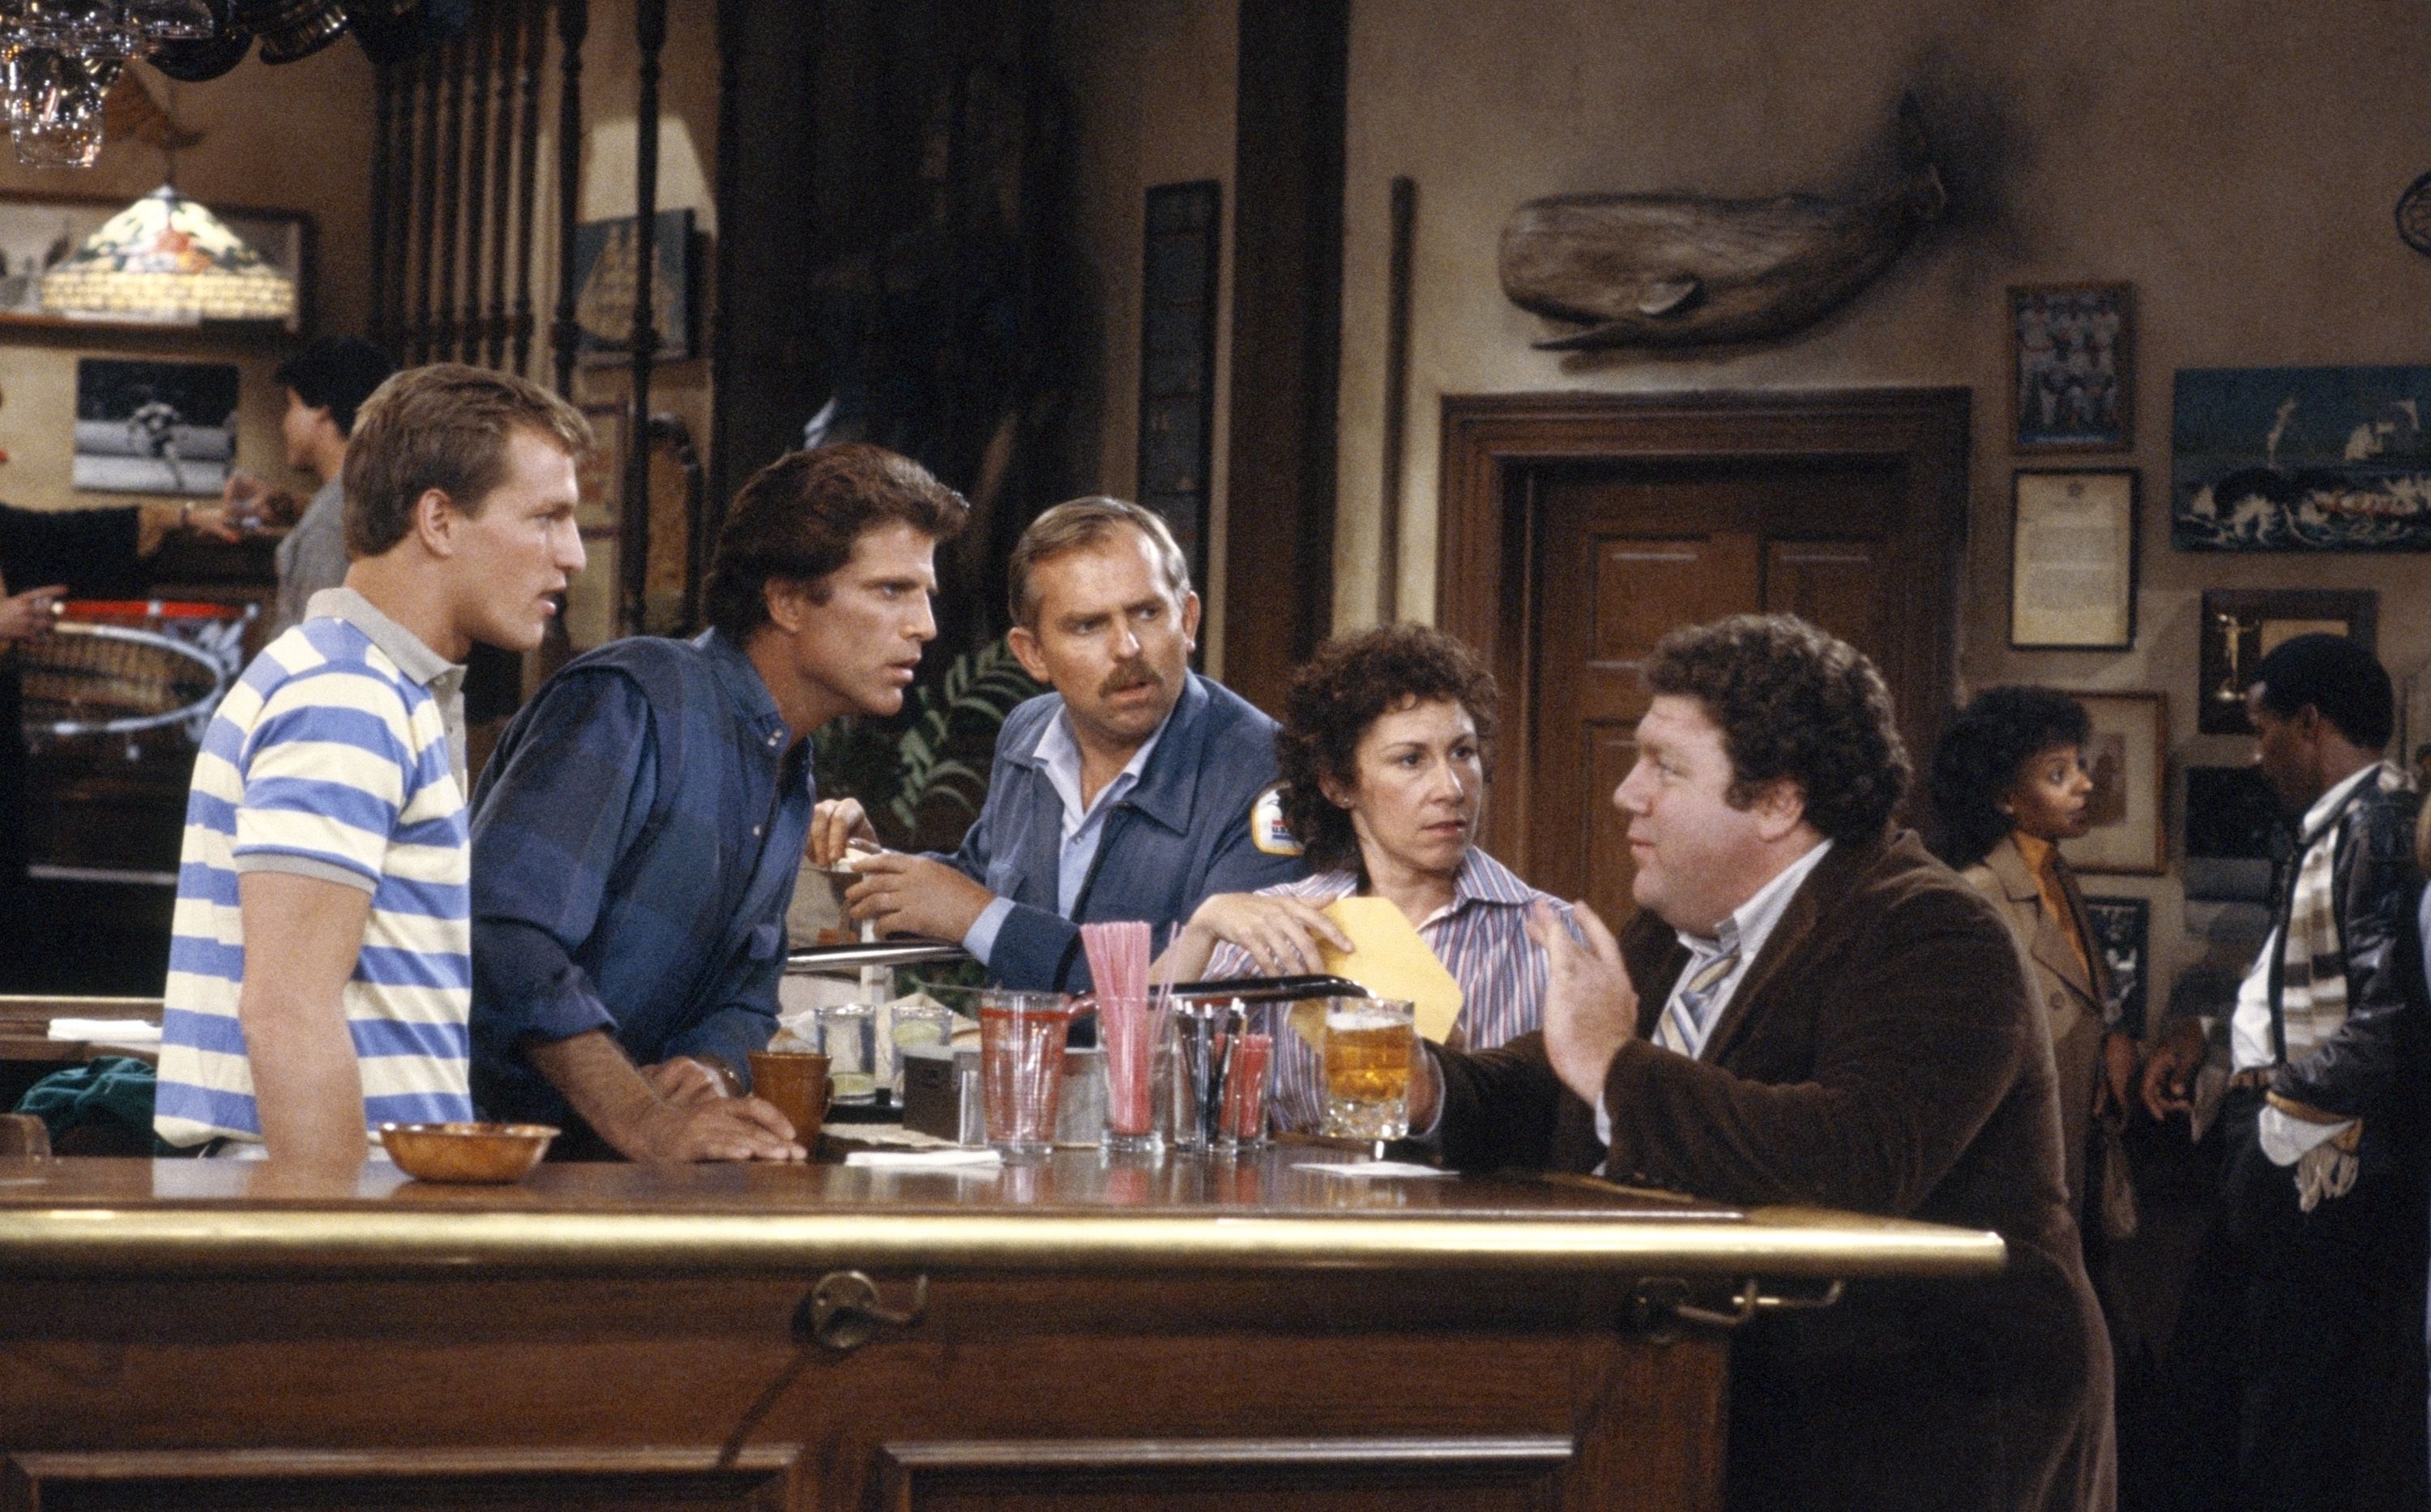 Cheers 25th Anniversary Review - Why Cheers Is Still a Great 